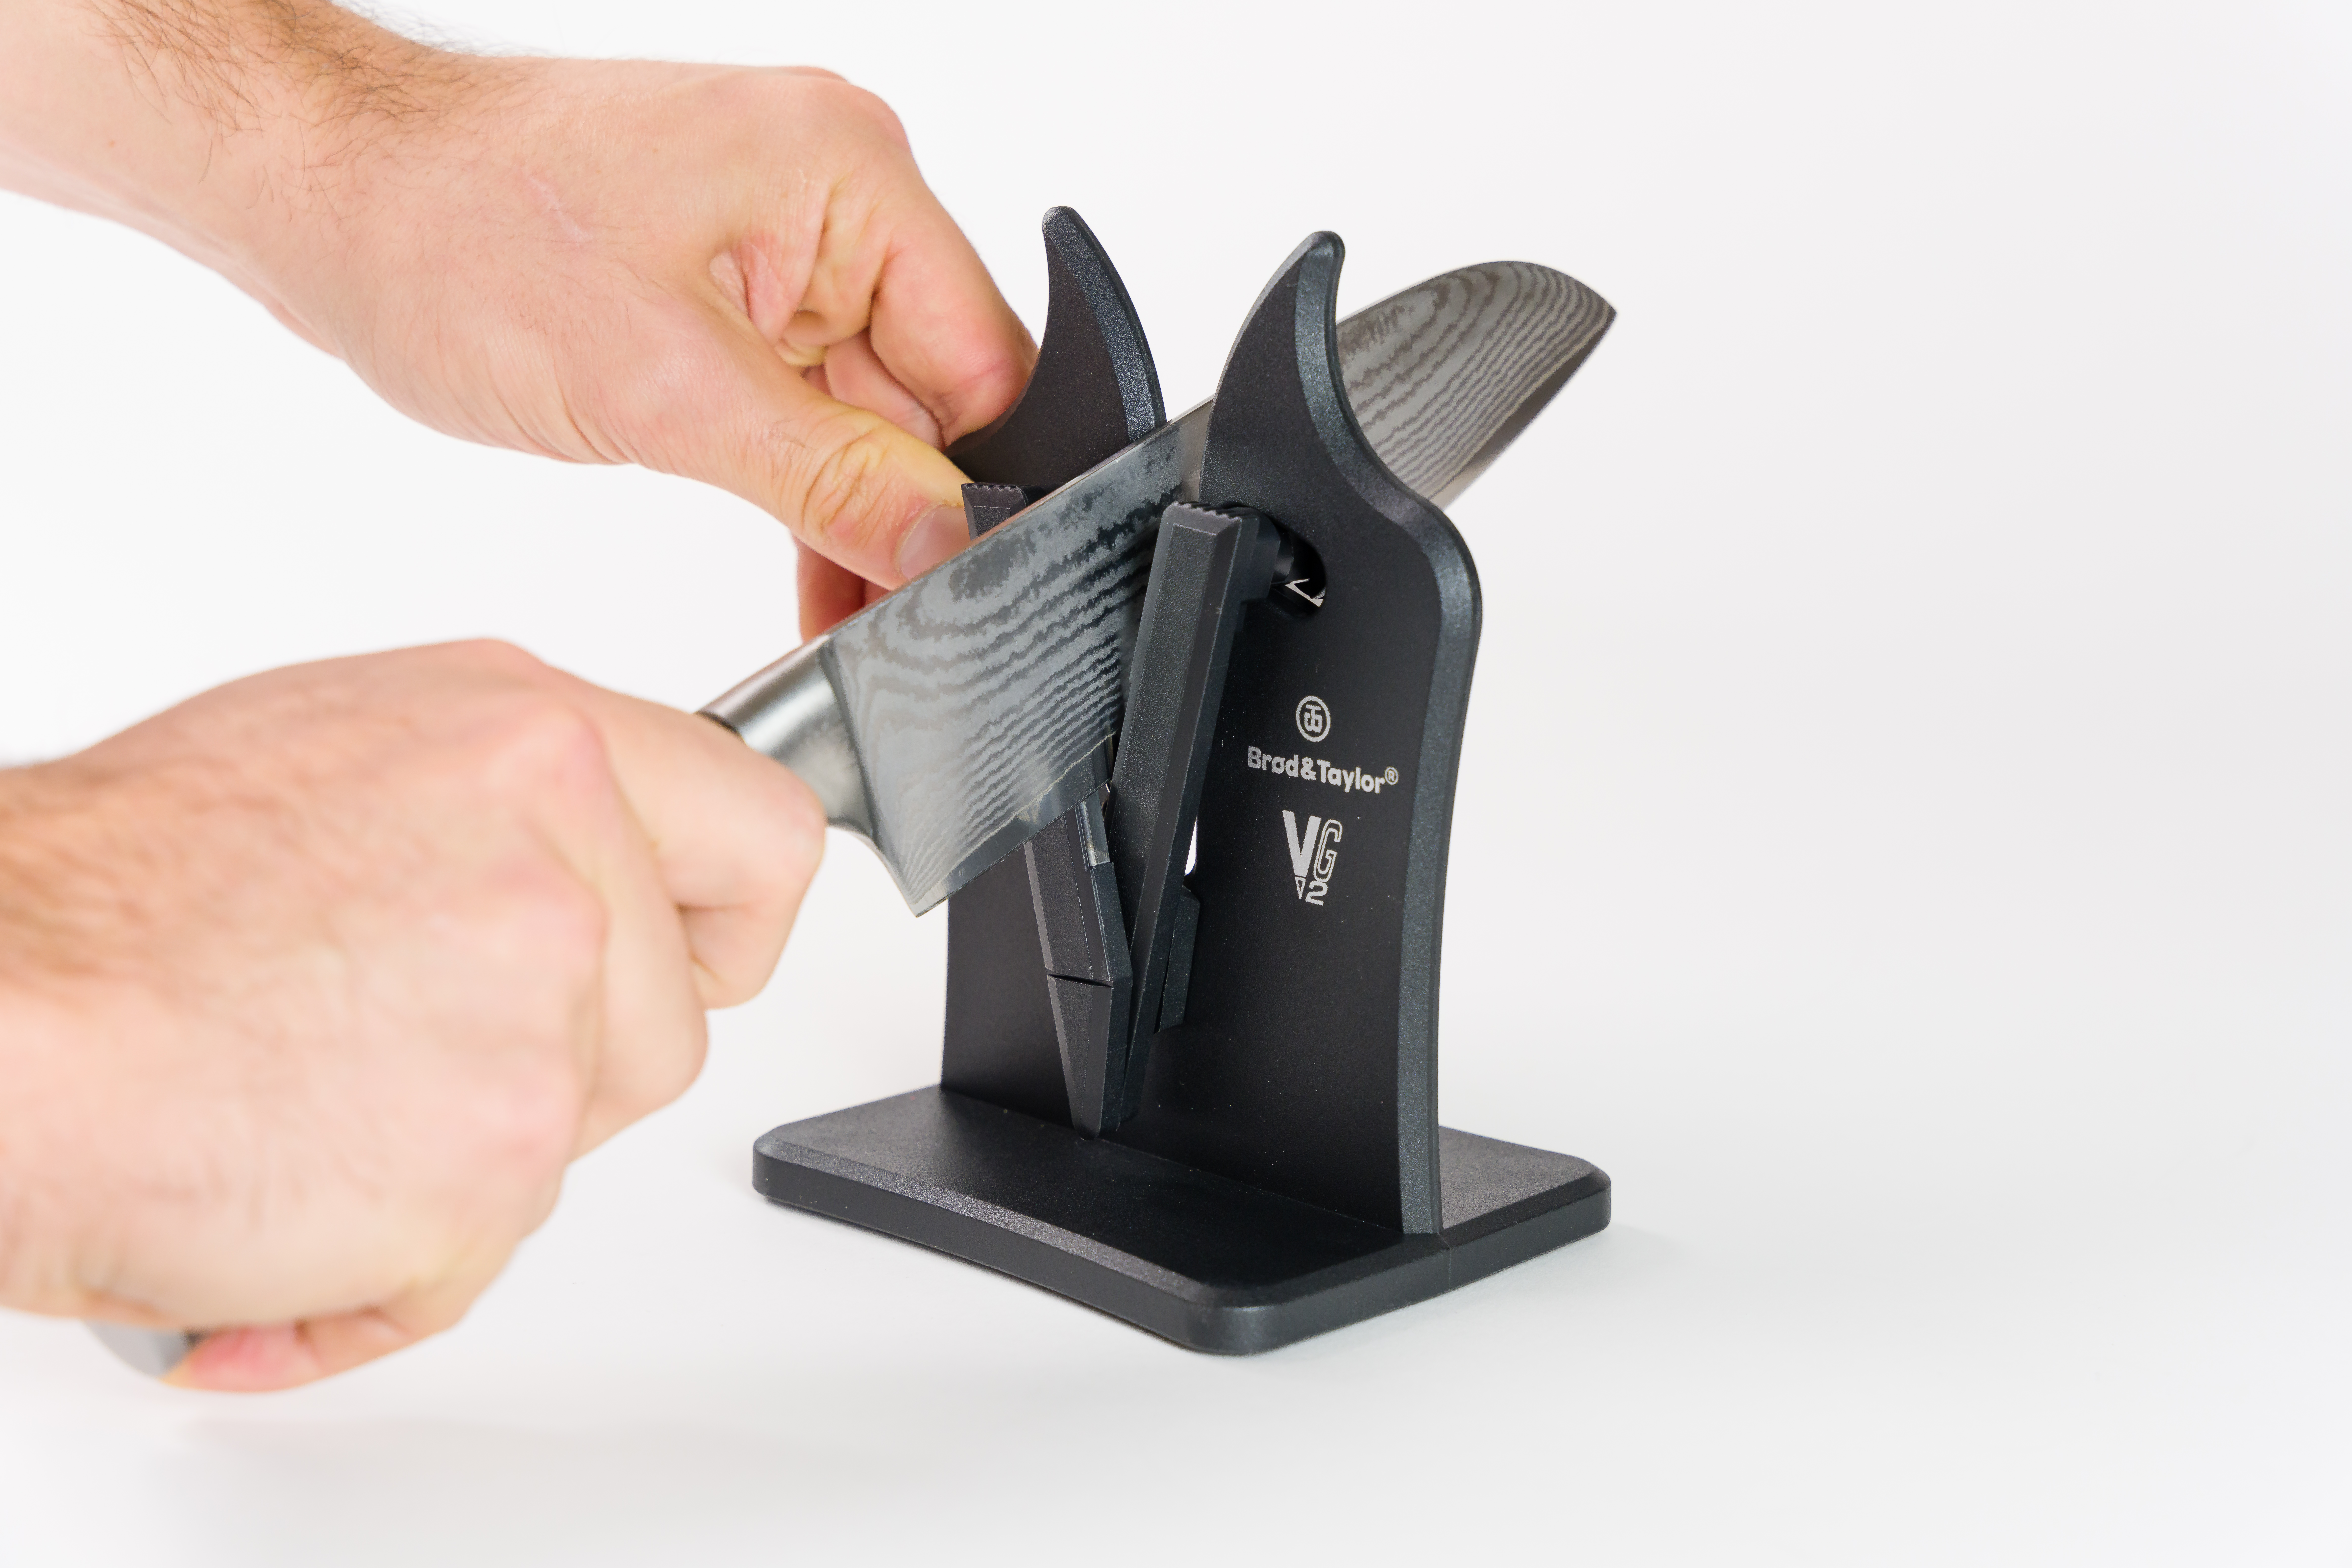 Brod and Taylor VG2 Knife Sharpener Classic